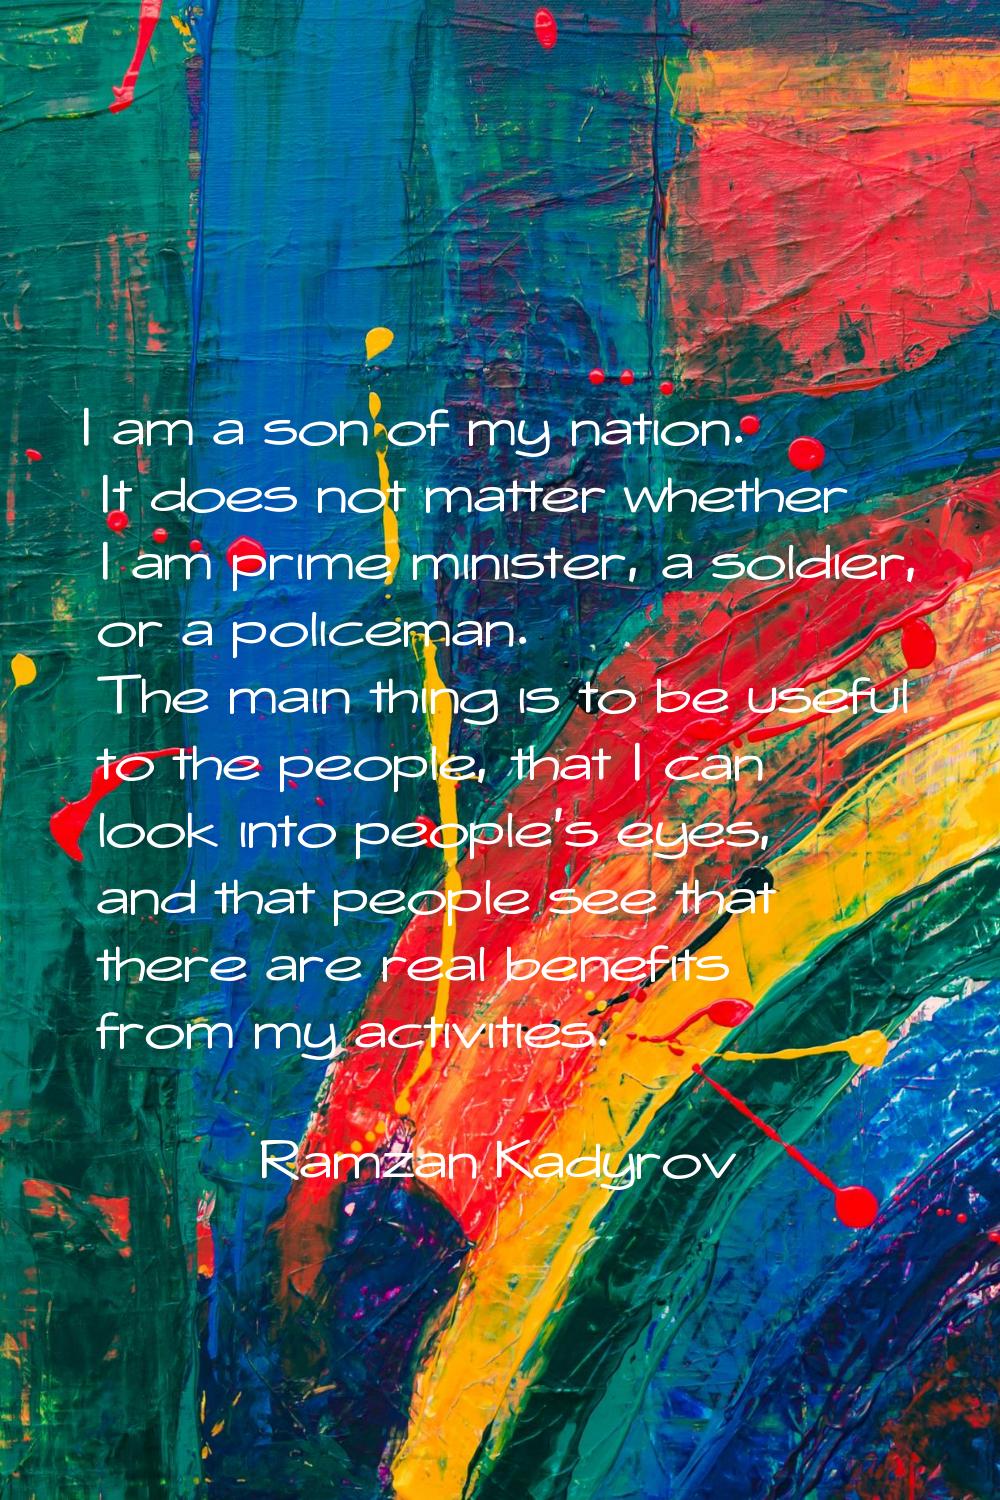 I am a son of my nation. It does not matter whether I am prime minister, a soldier, or a policeman.